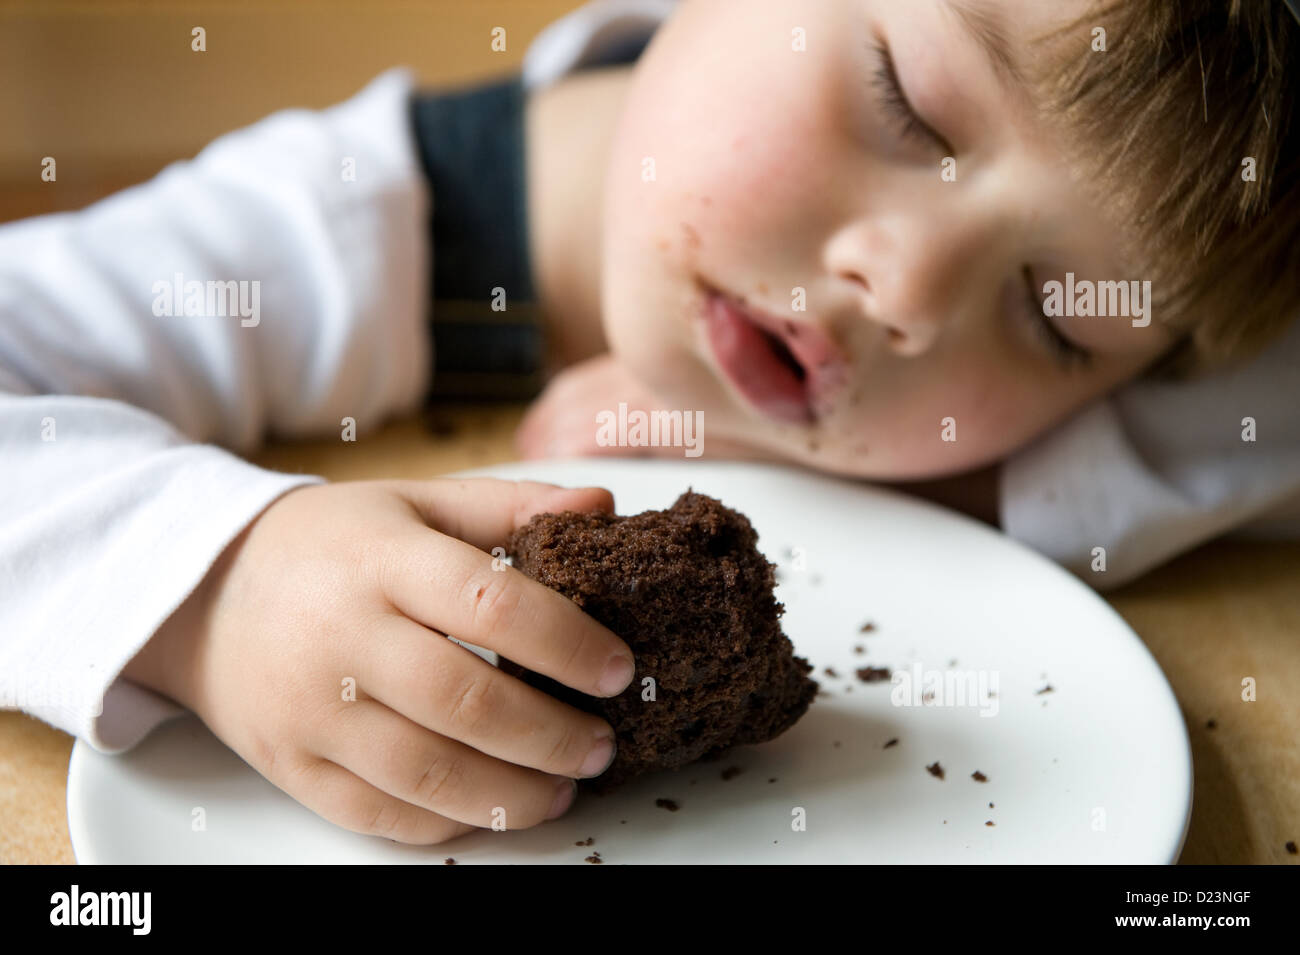 Berlin, Germany, the boy is asleep while eating cake Stock Photo